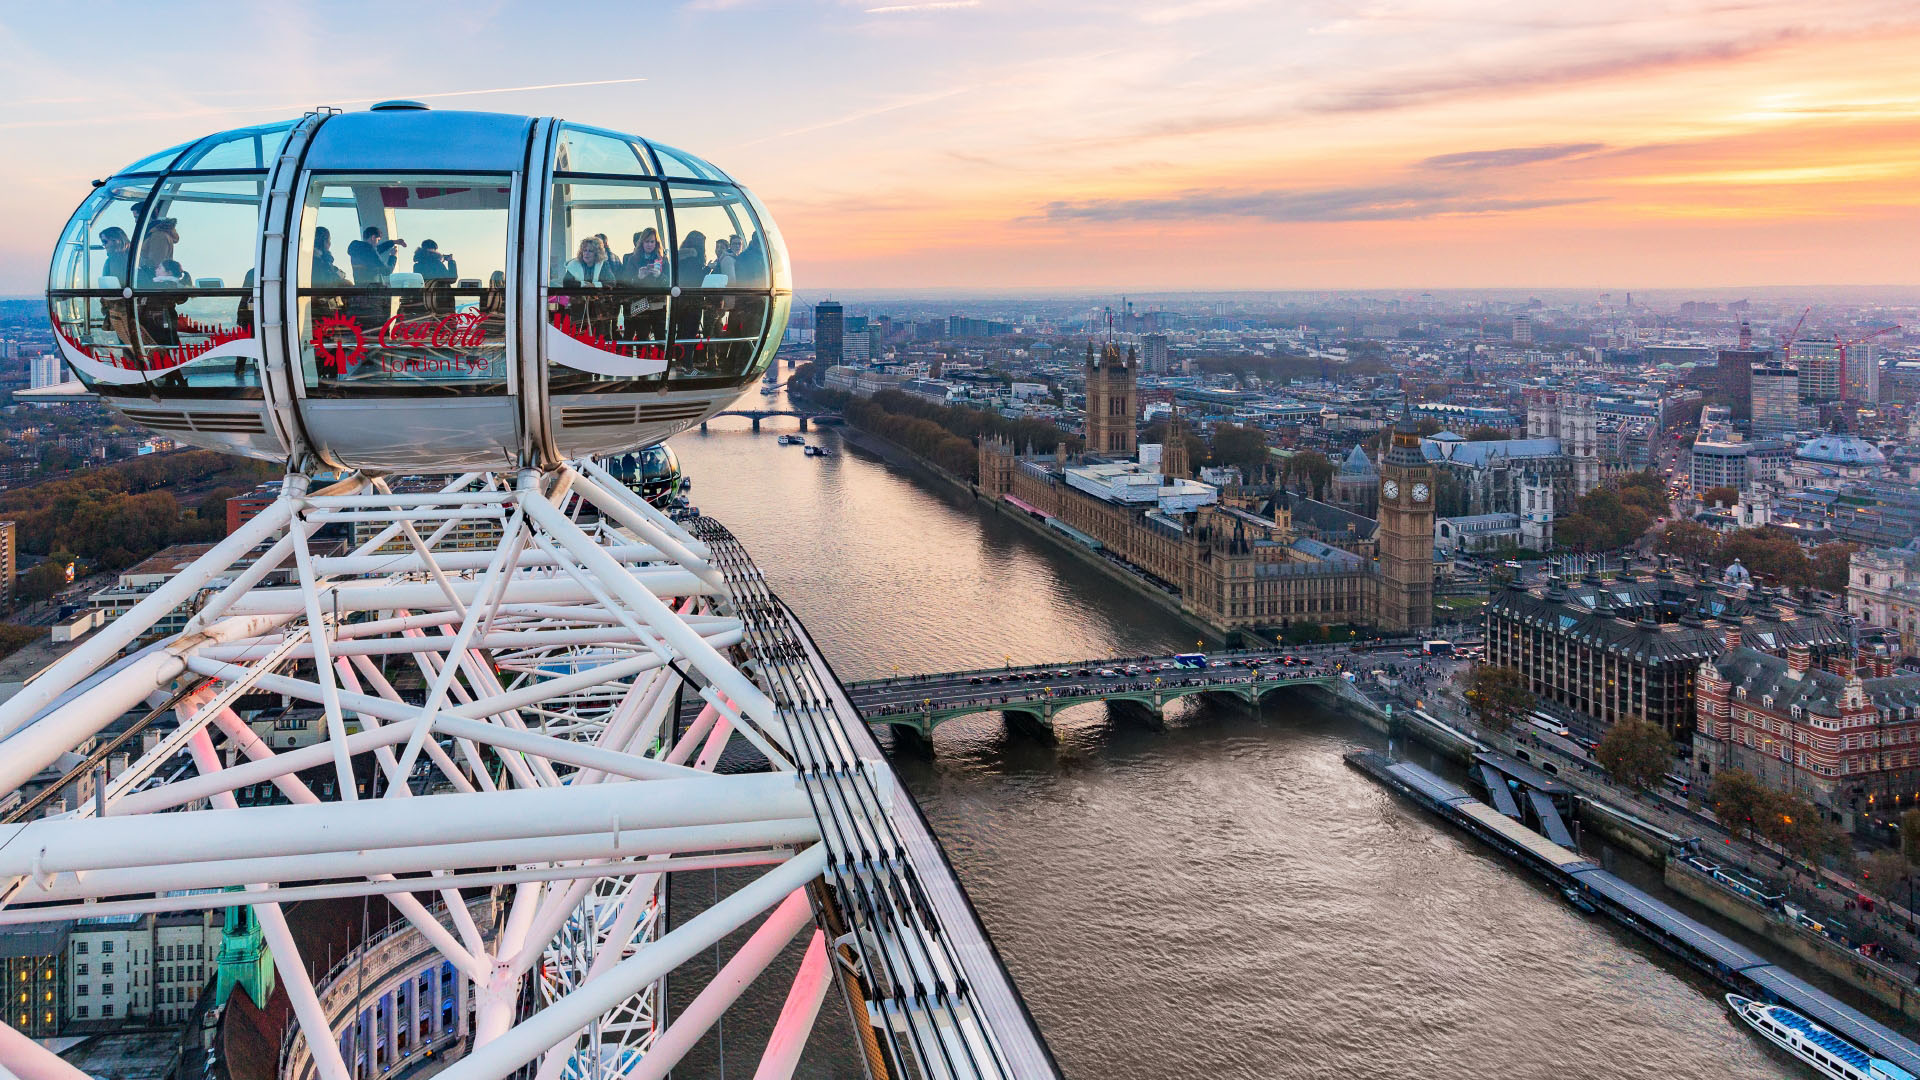 View of London including the Thames and Big Ben from the London Eye with a capsule in the foreground.